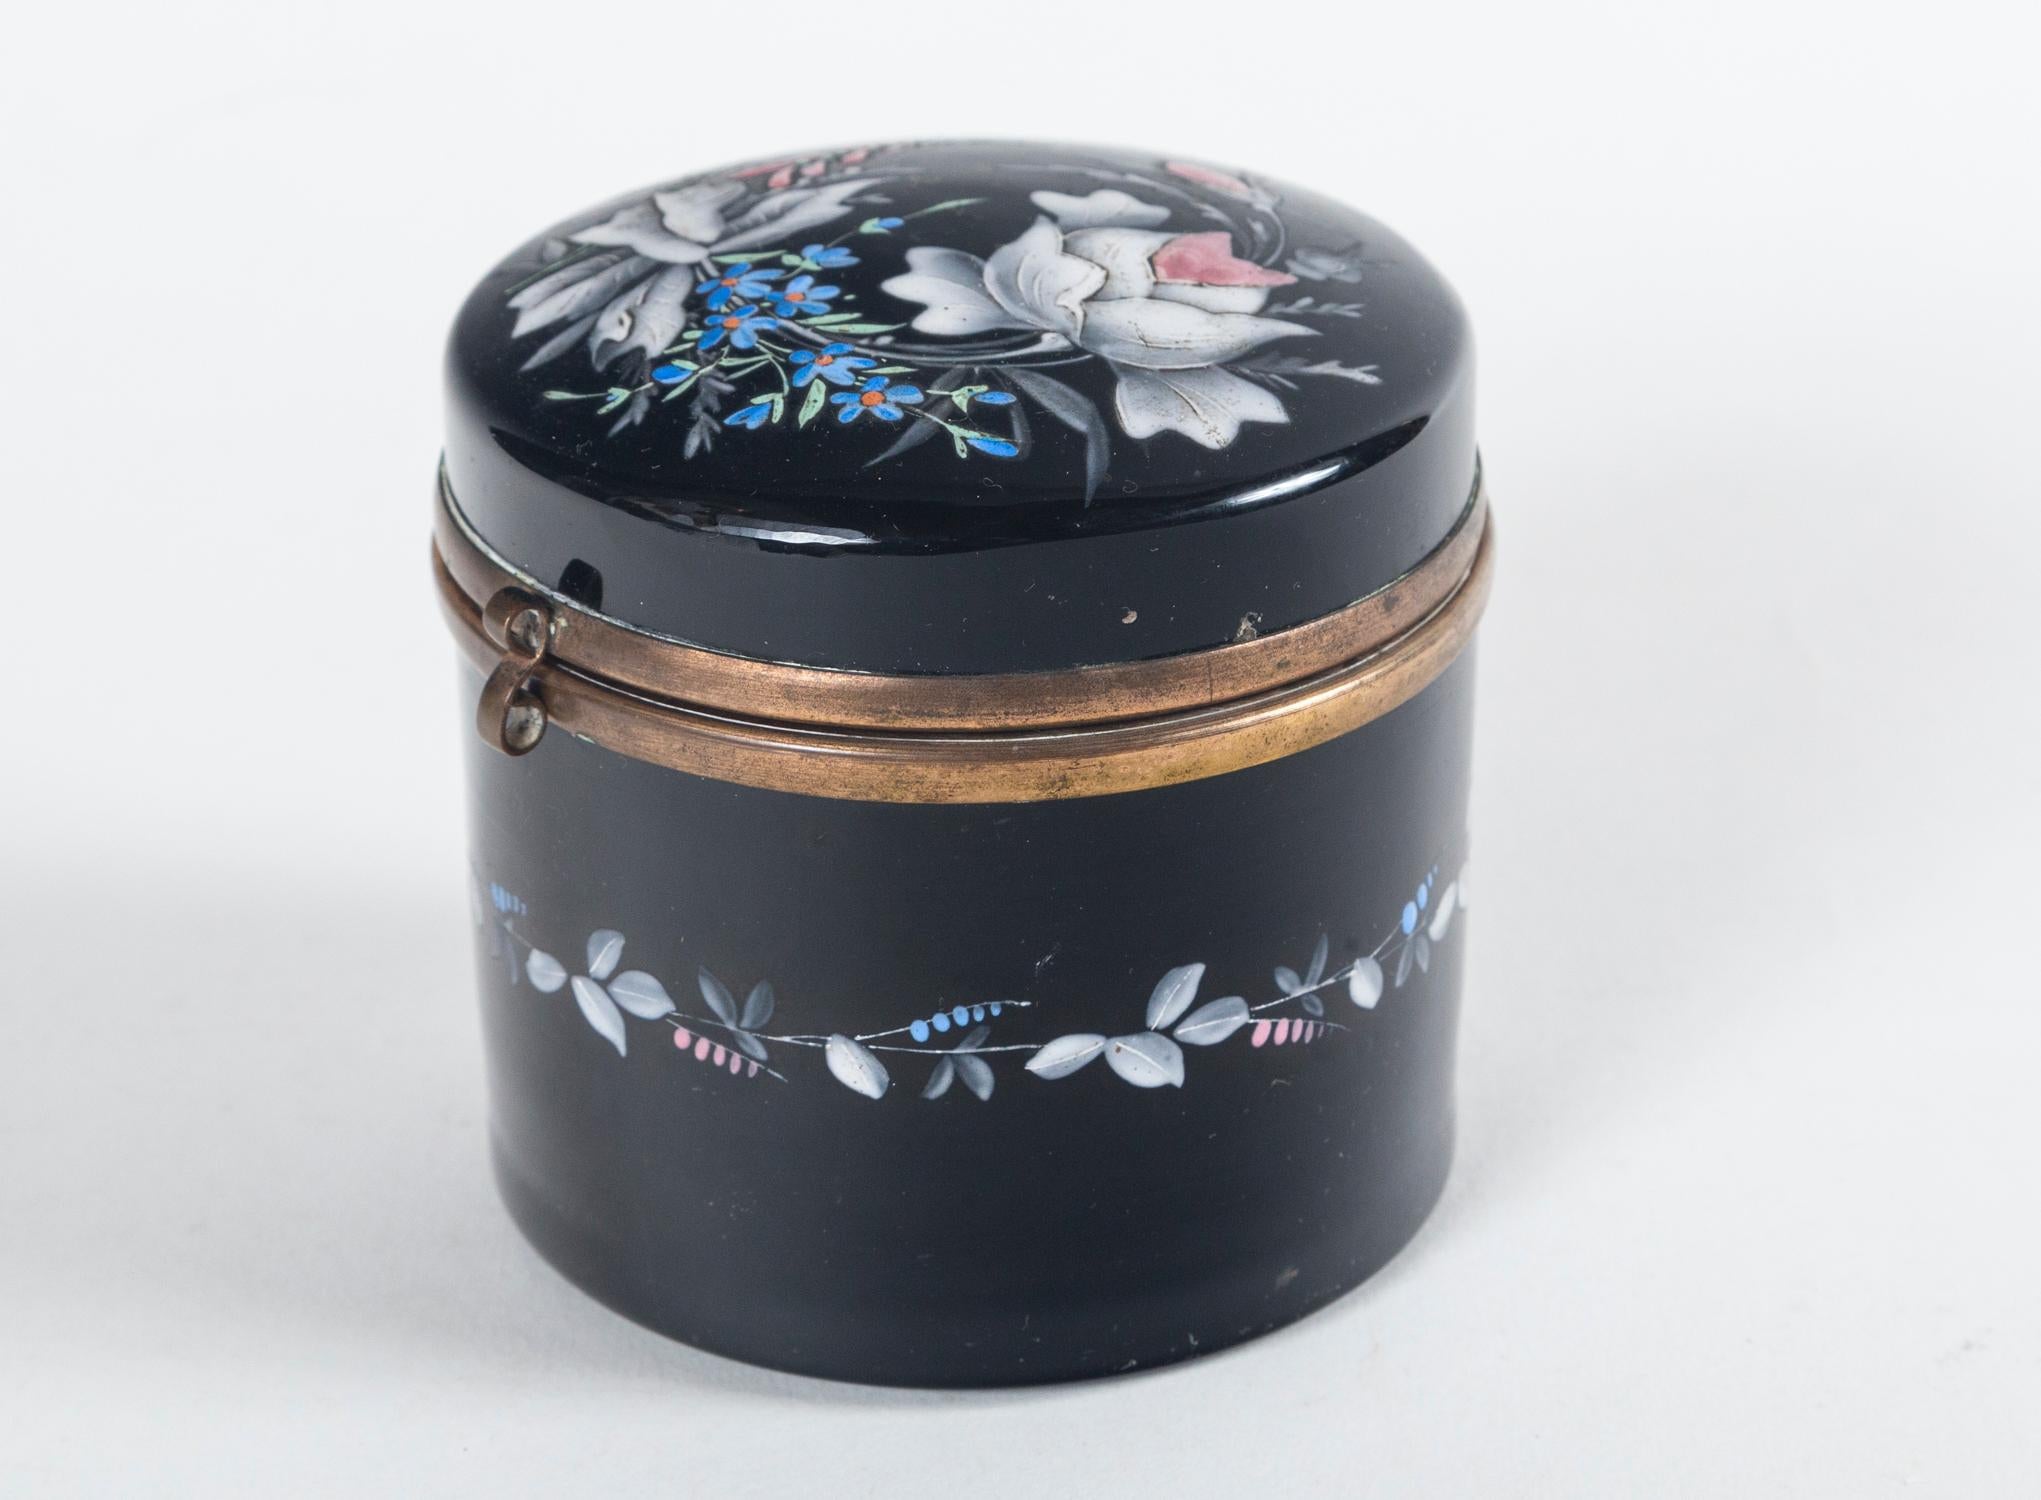 French Opaline enamelled glass vanity box, late 19th century. Delicate floral design on black glass with bronze trim.